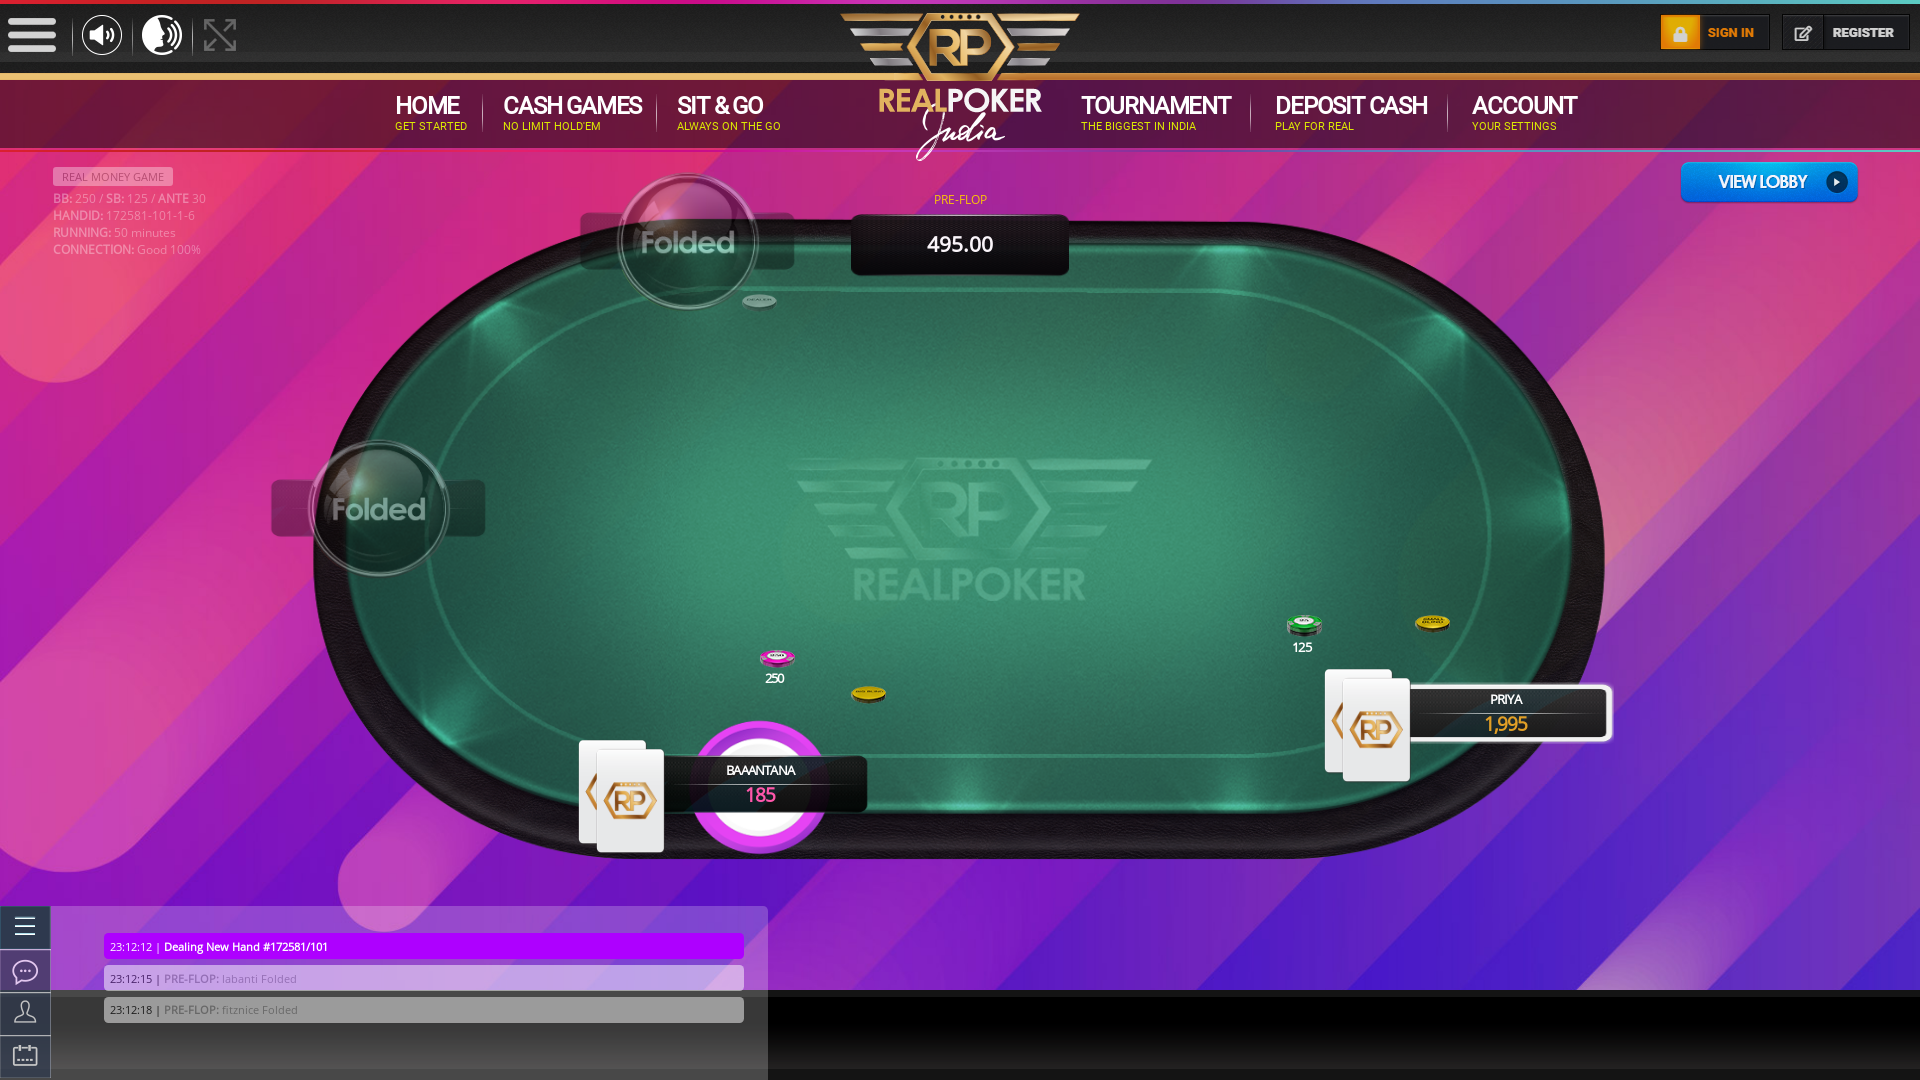 Indian online poker on a 10 player table in the 50th minute match up